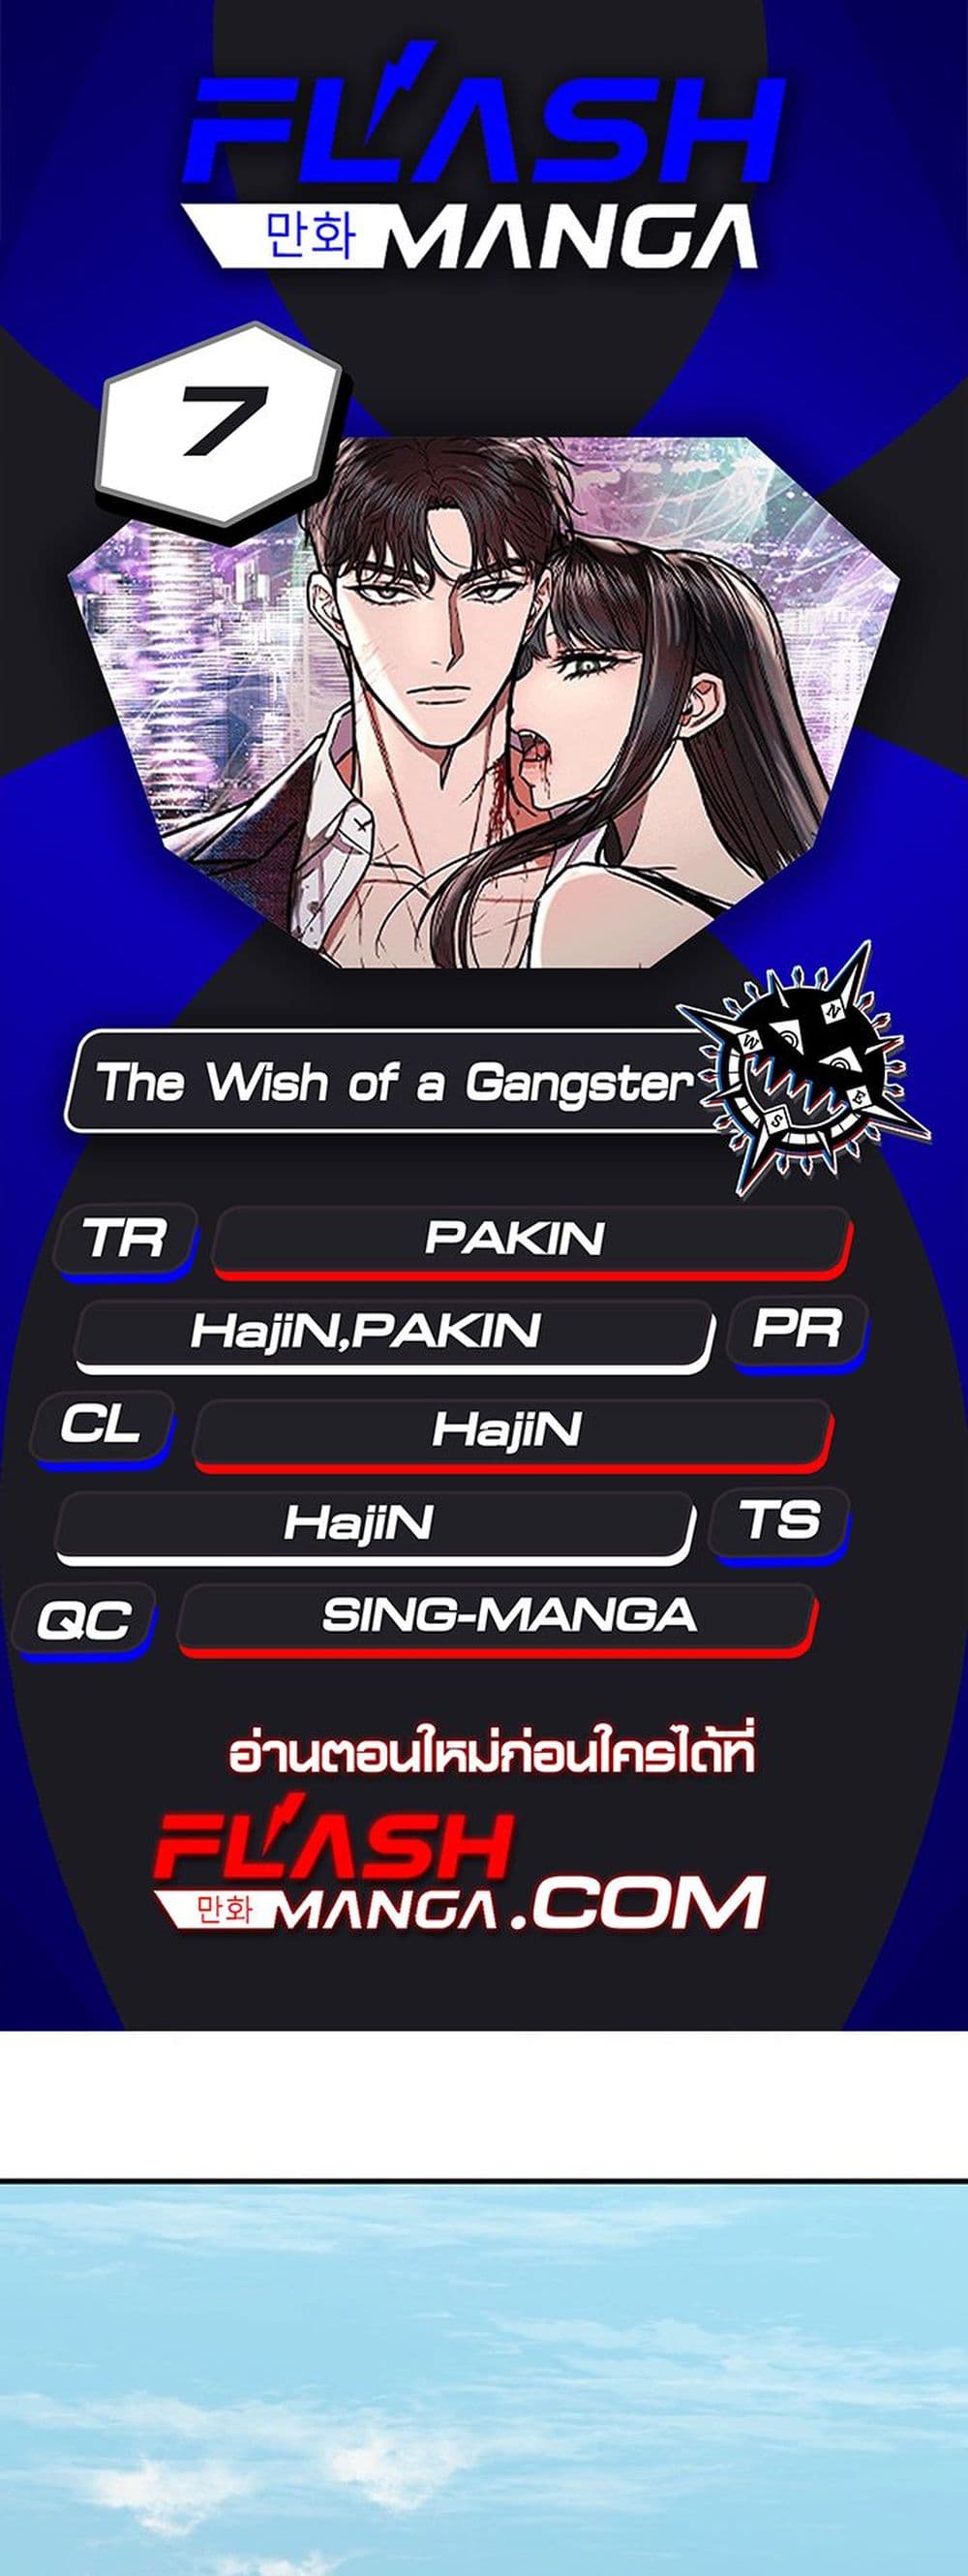 The Wish of a Gangster 7-7